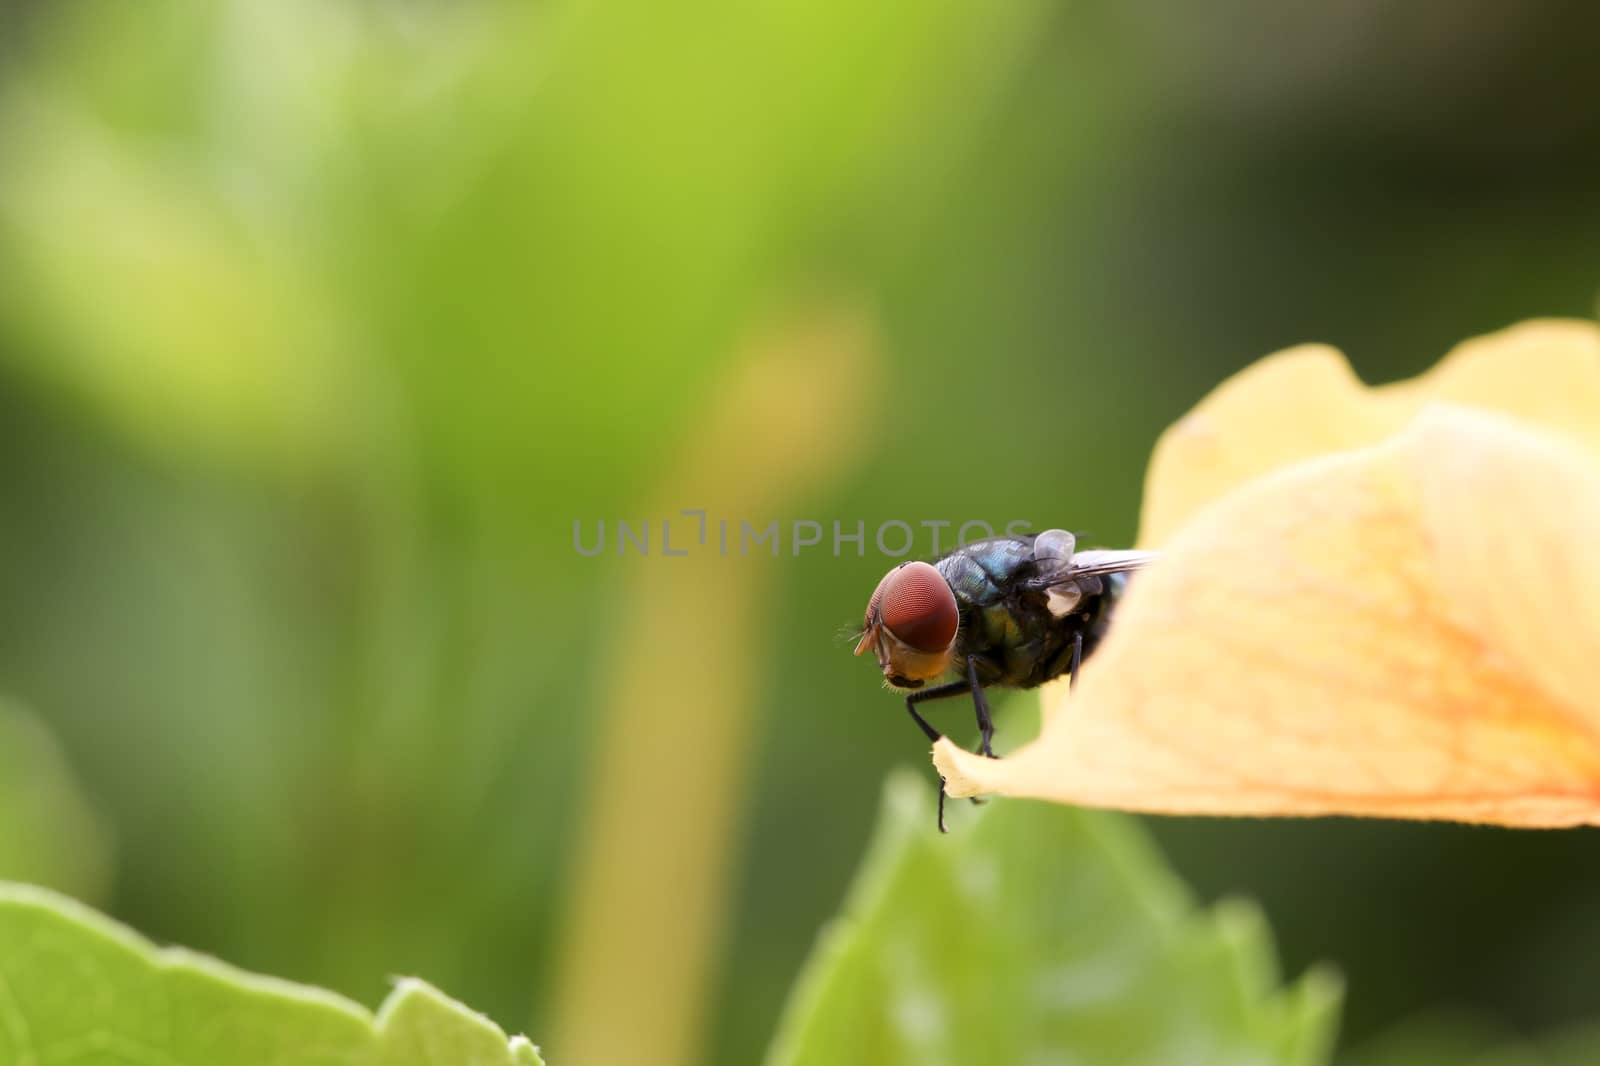 Fly on the hibiscus petals by Chattranusorn09